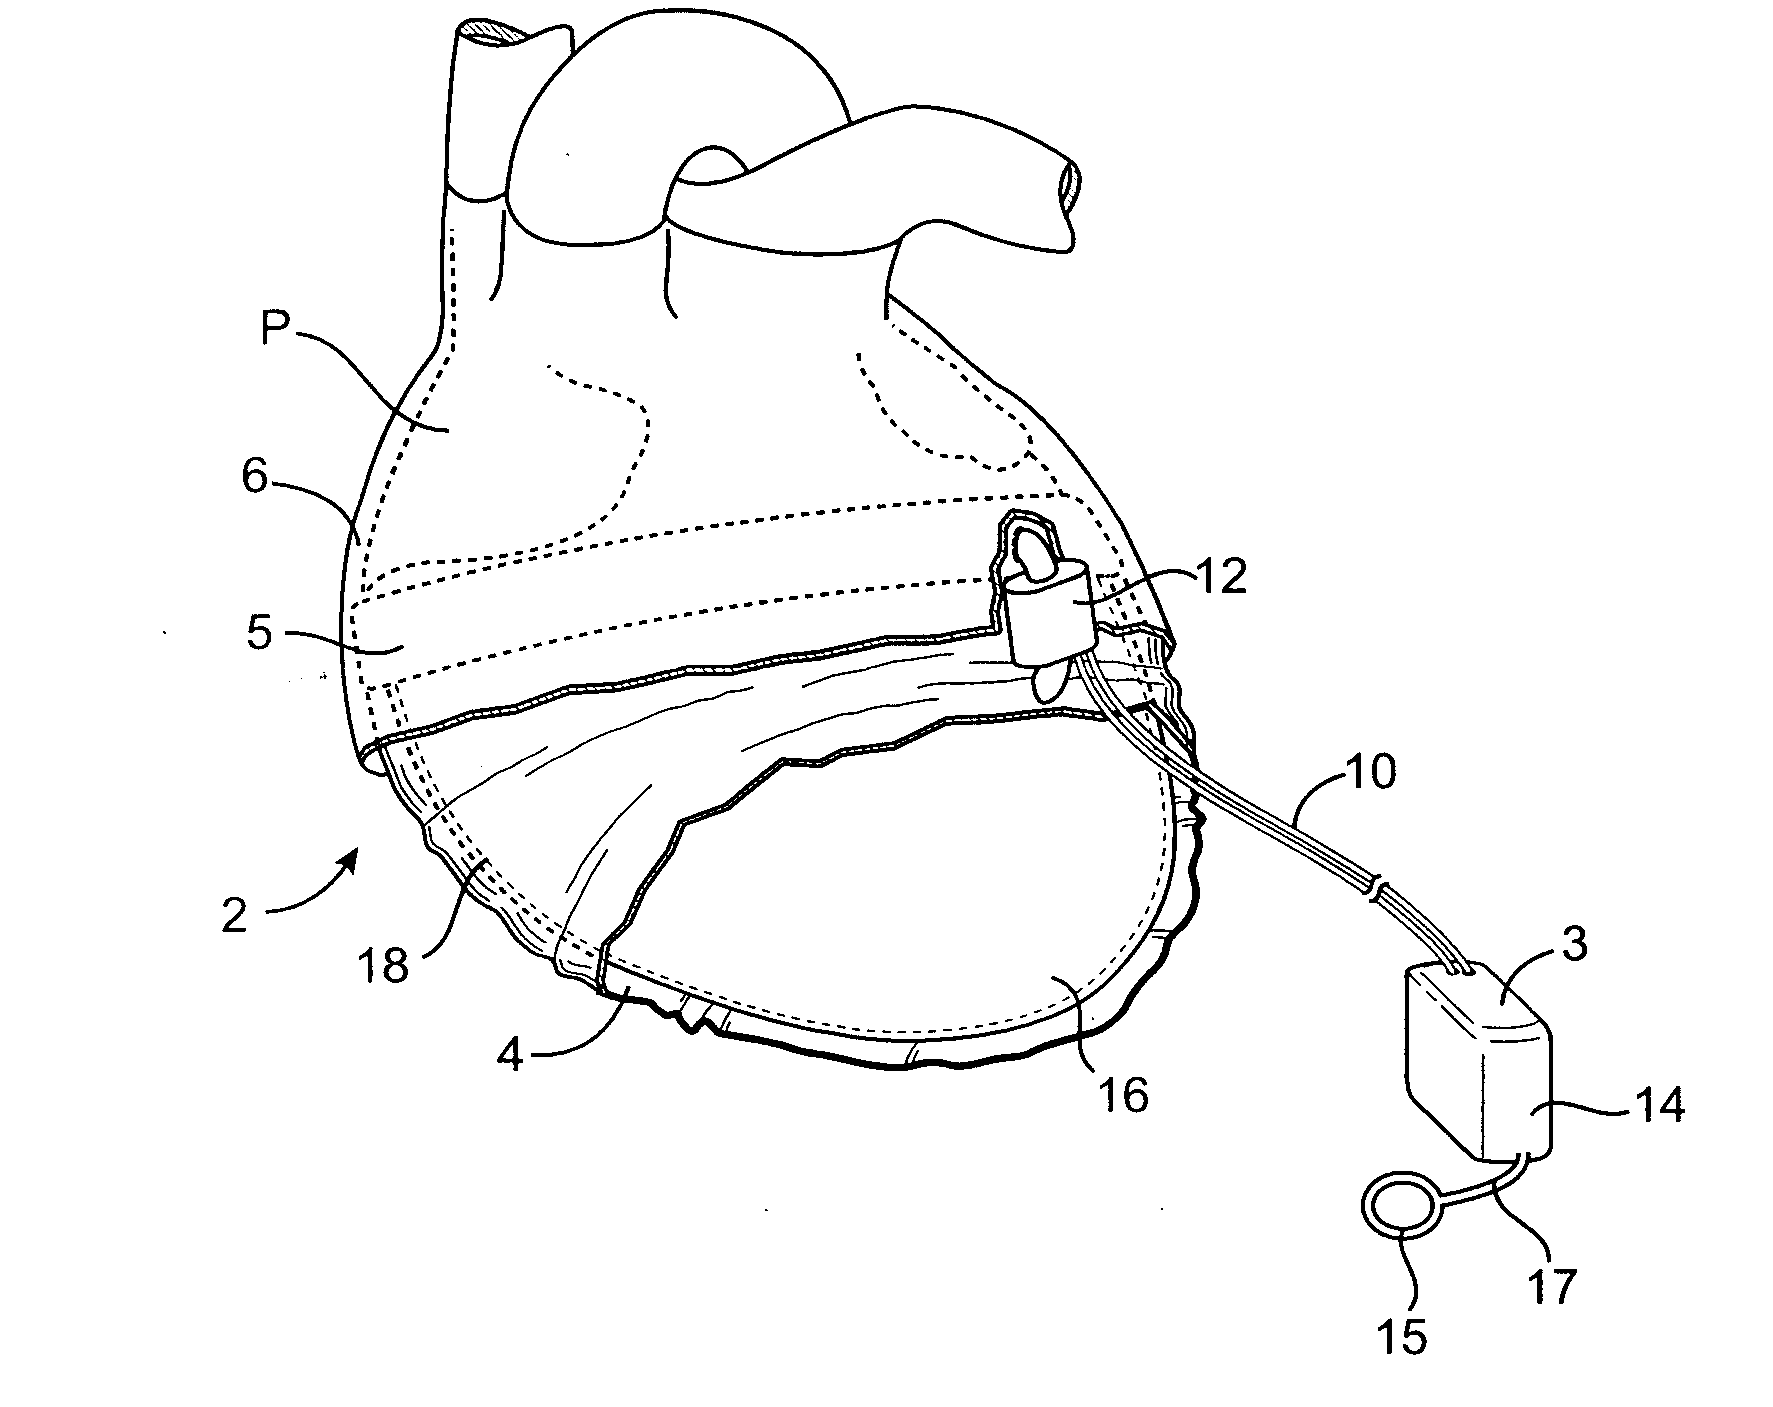 Devices and methods for providing cardiac assistance